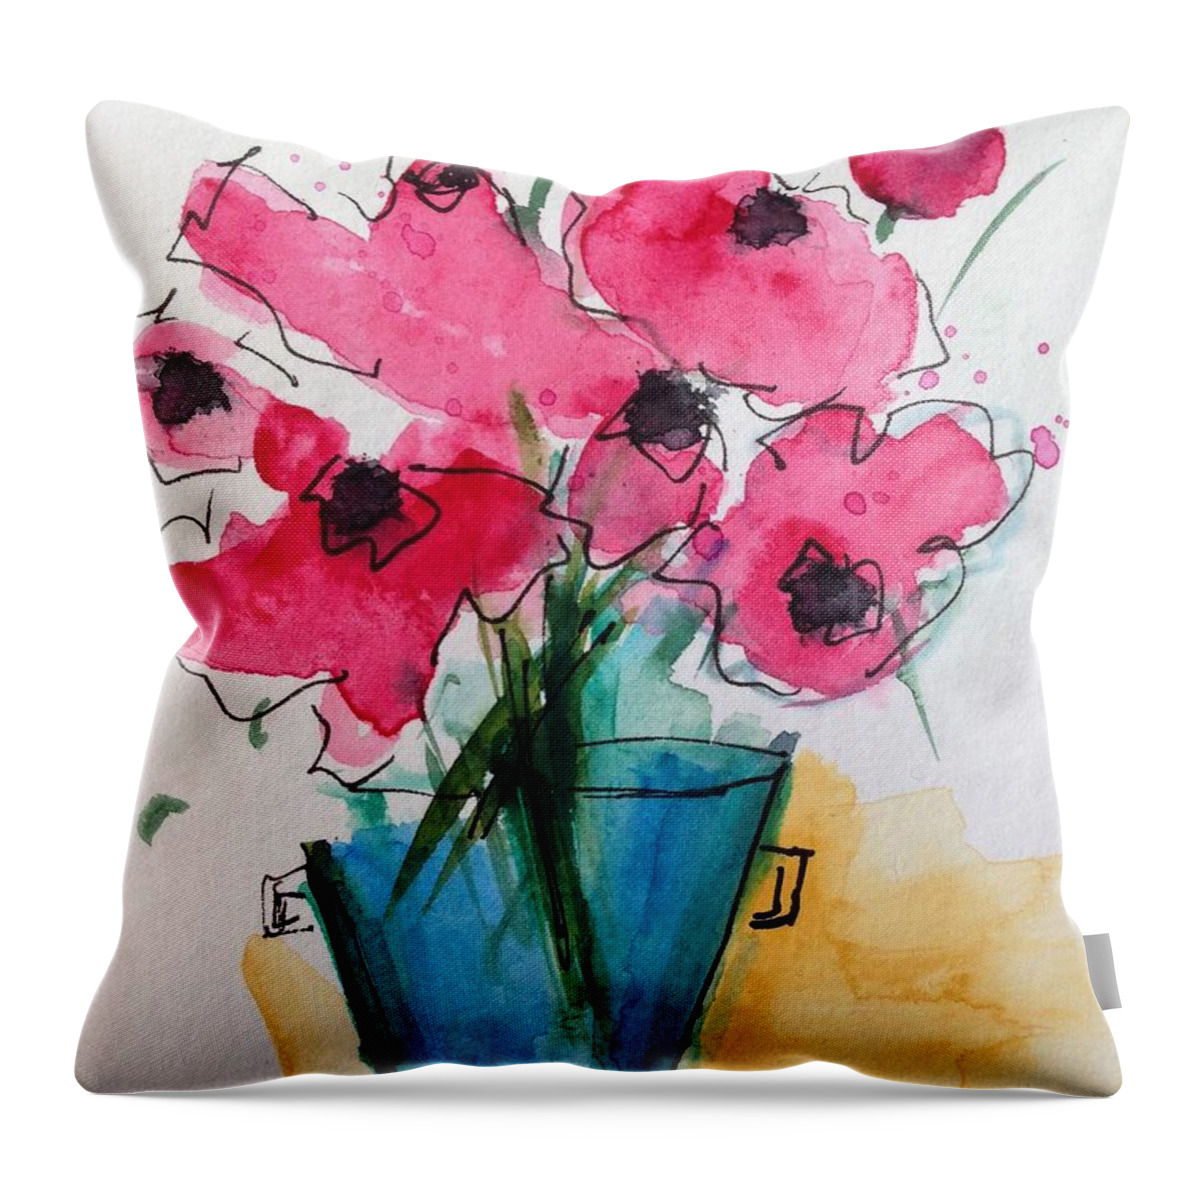 Bouquet Throw Pillow featuring the painting Crazy Bouquet by Britta Zehm